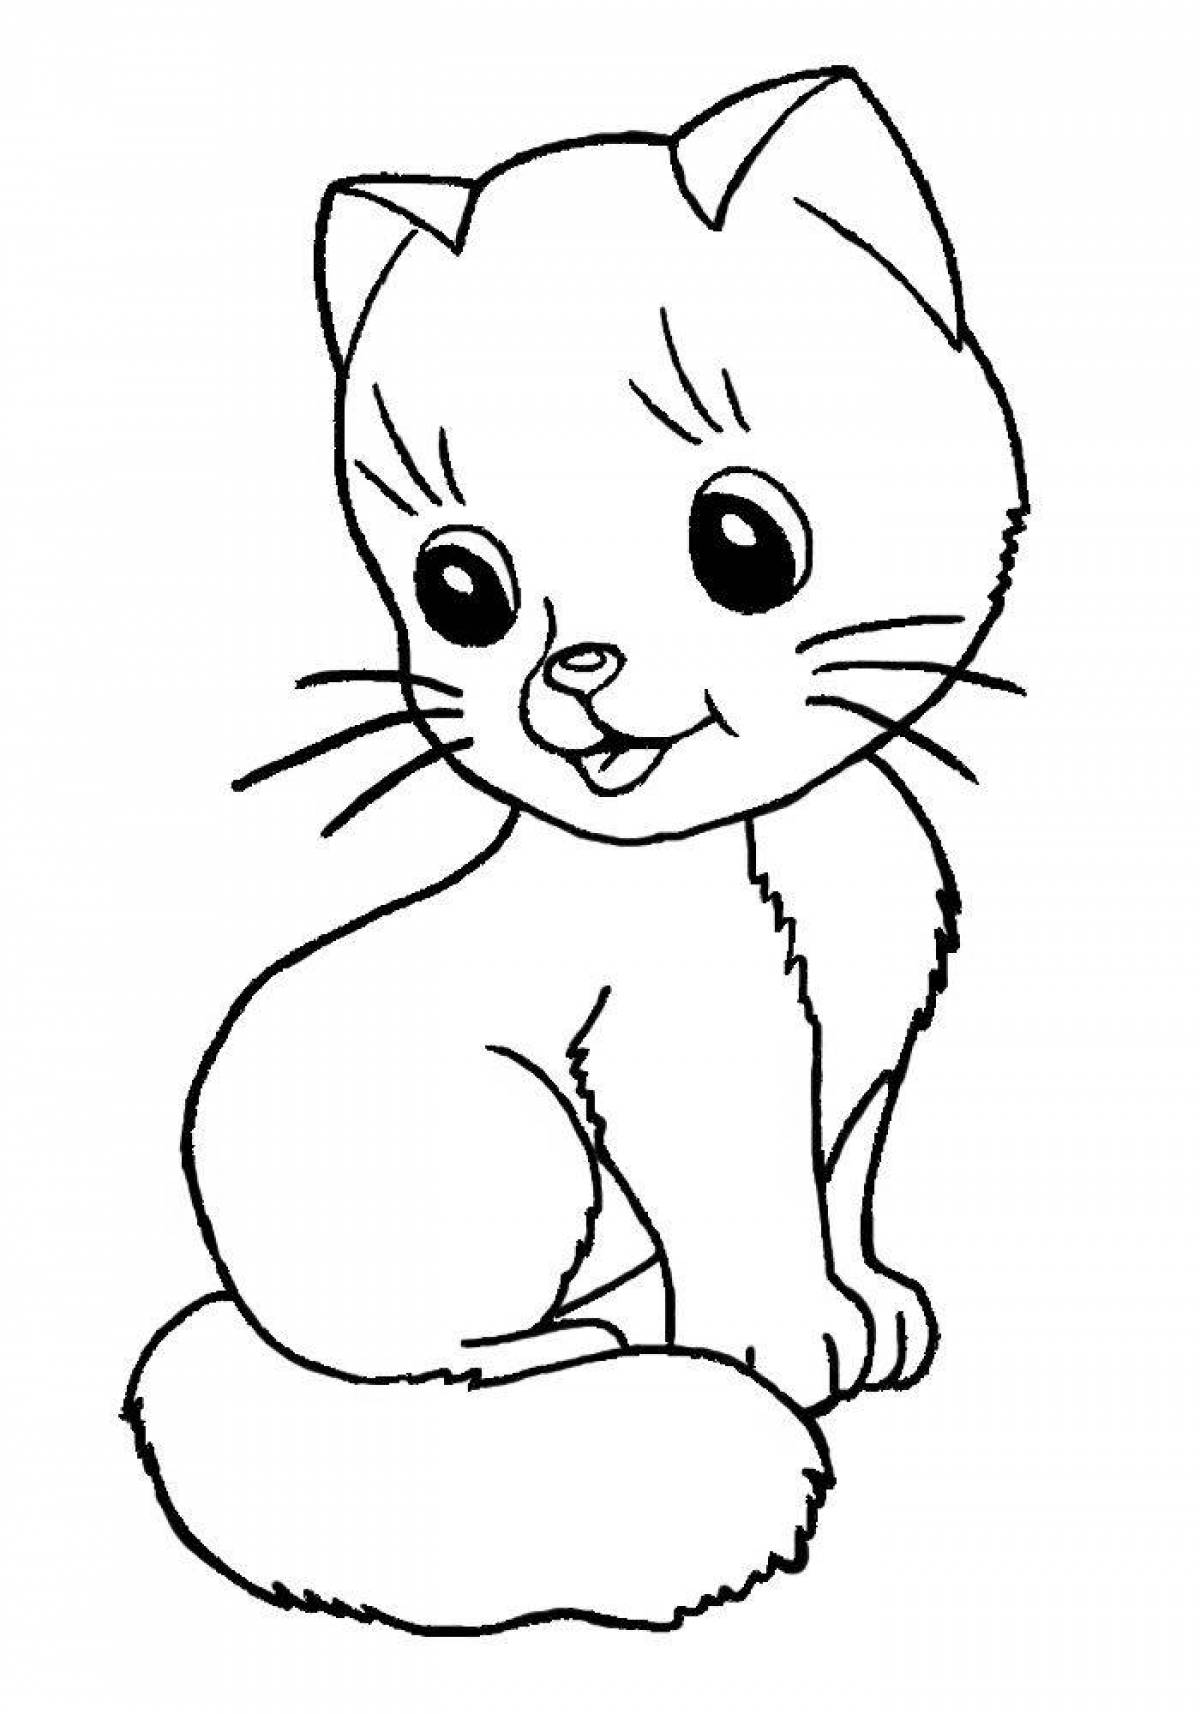 Adorable cat coloring book for kids 6-7 years old